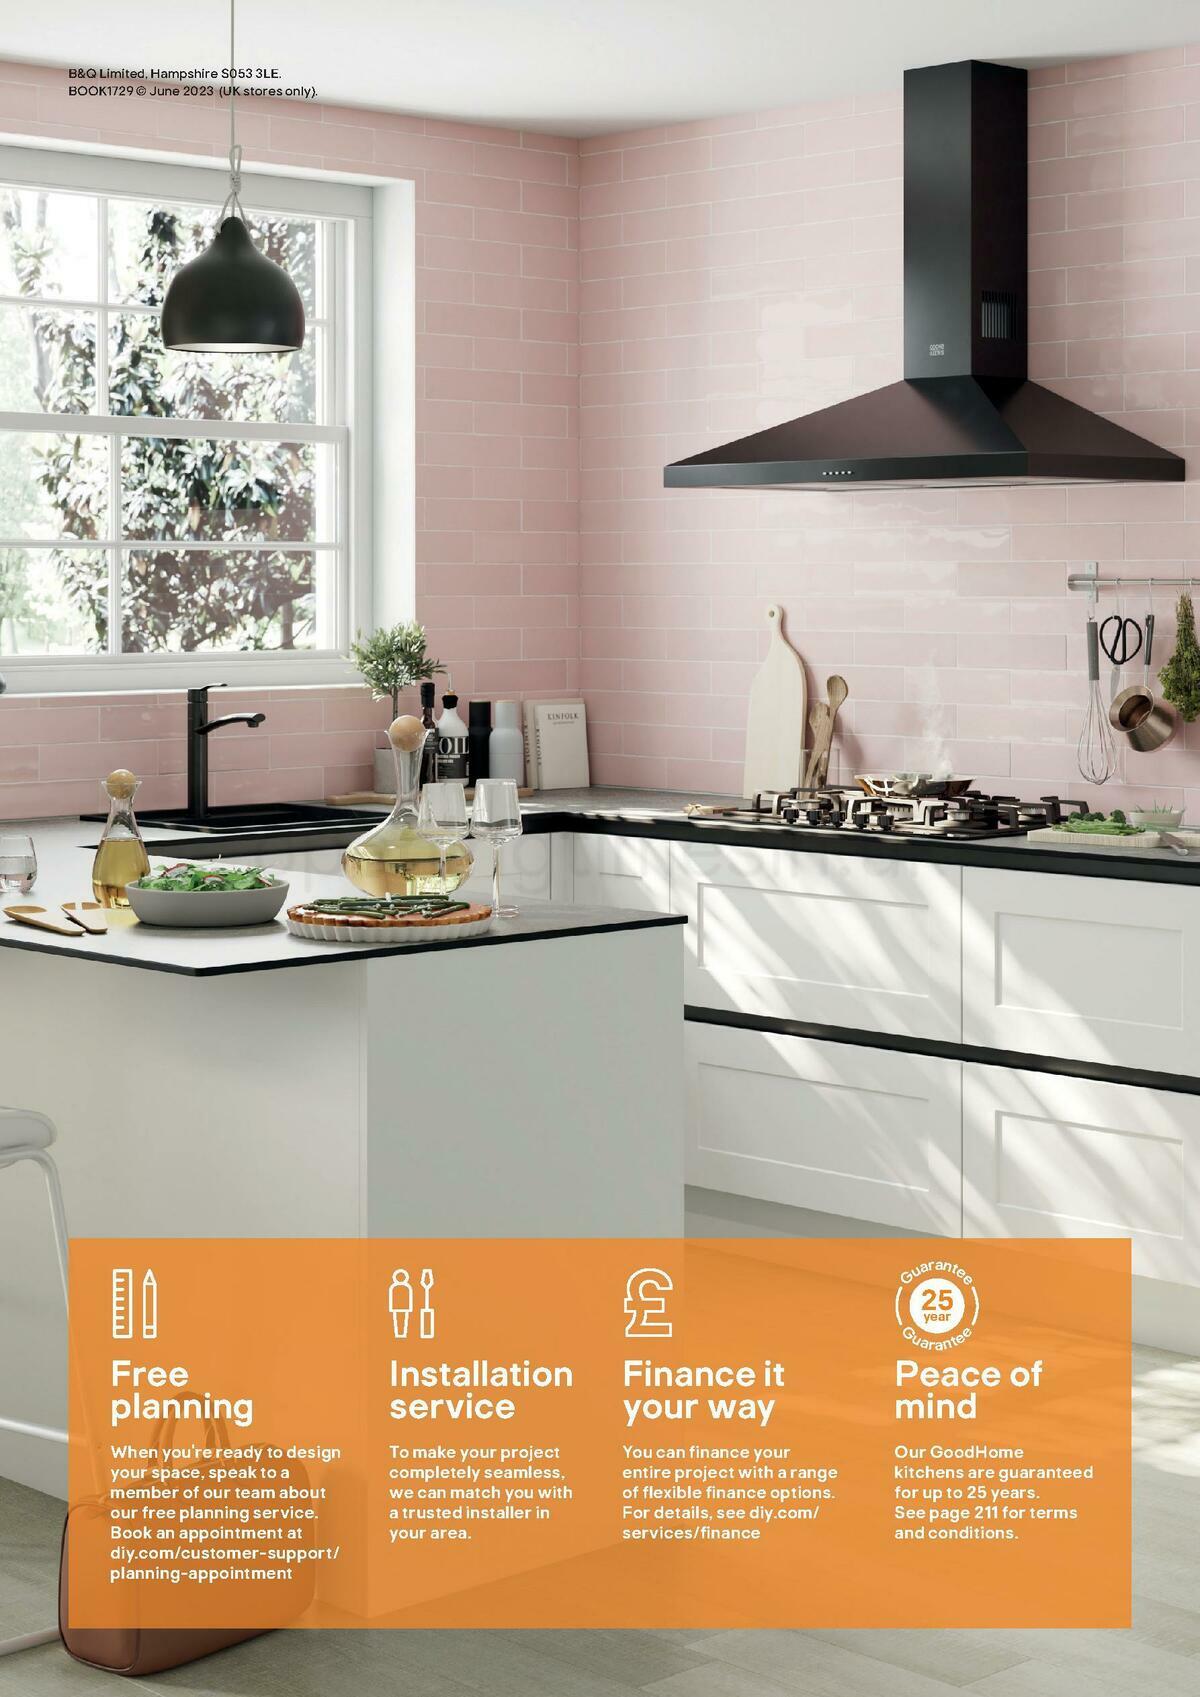 B&Q Kitchens Product & Cabinetry Guide Offers from 16 June